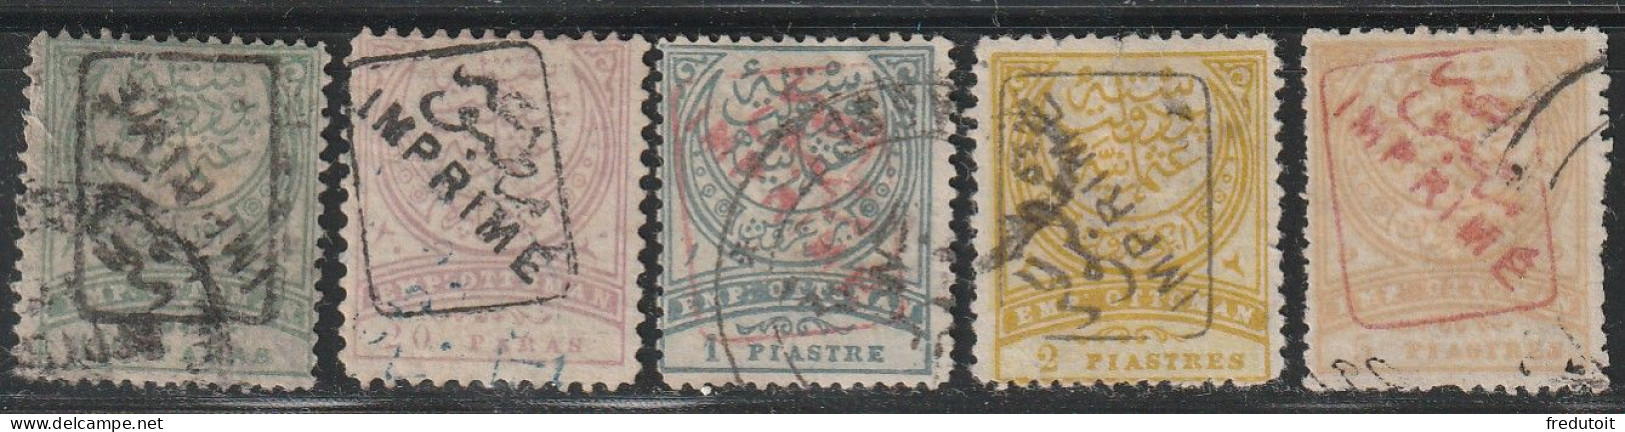 TURQUIE - Timbres Pour Journaux : N°2/6 Obl (1891) - Francobolli Per Giornali